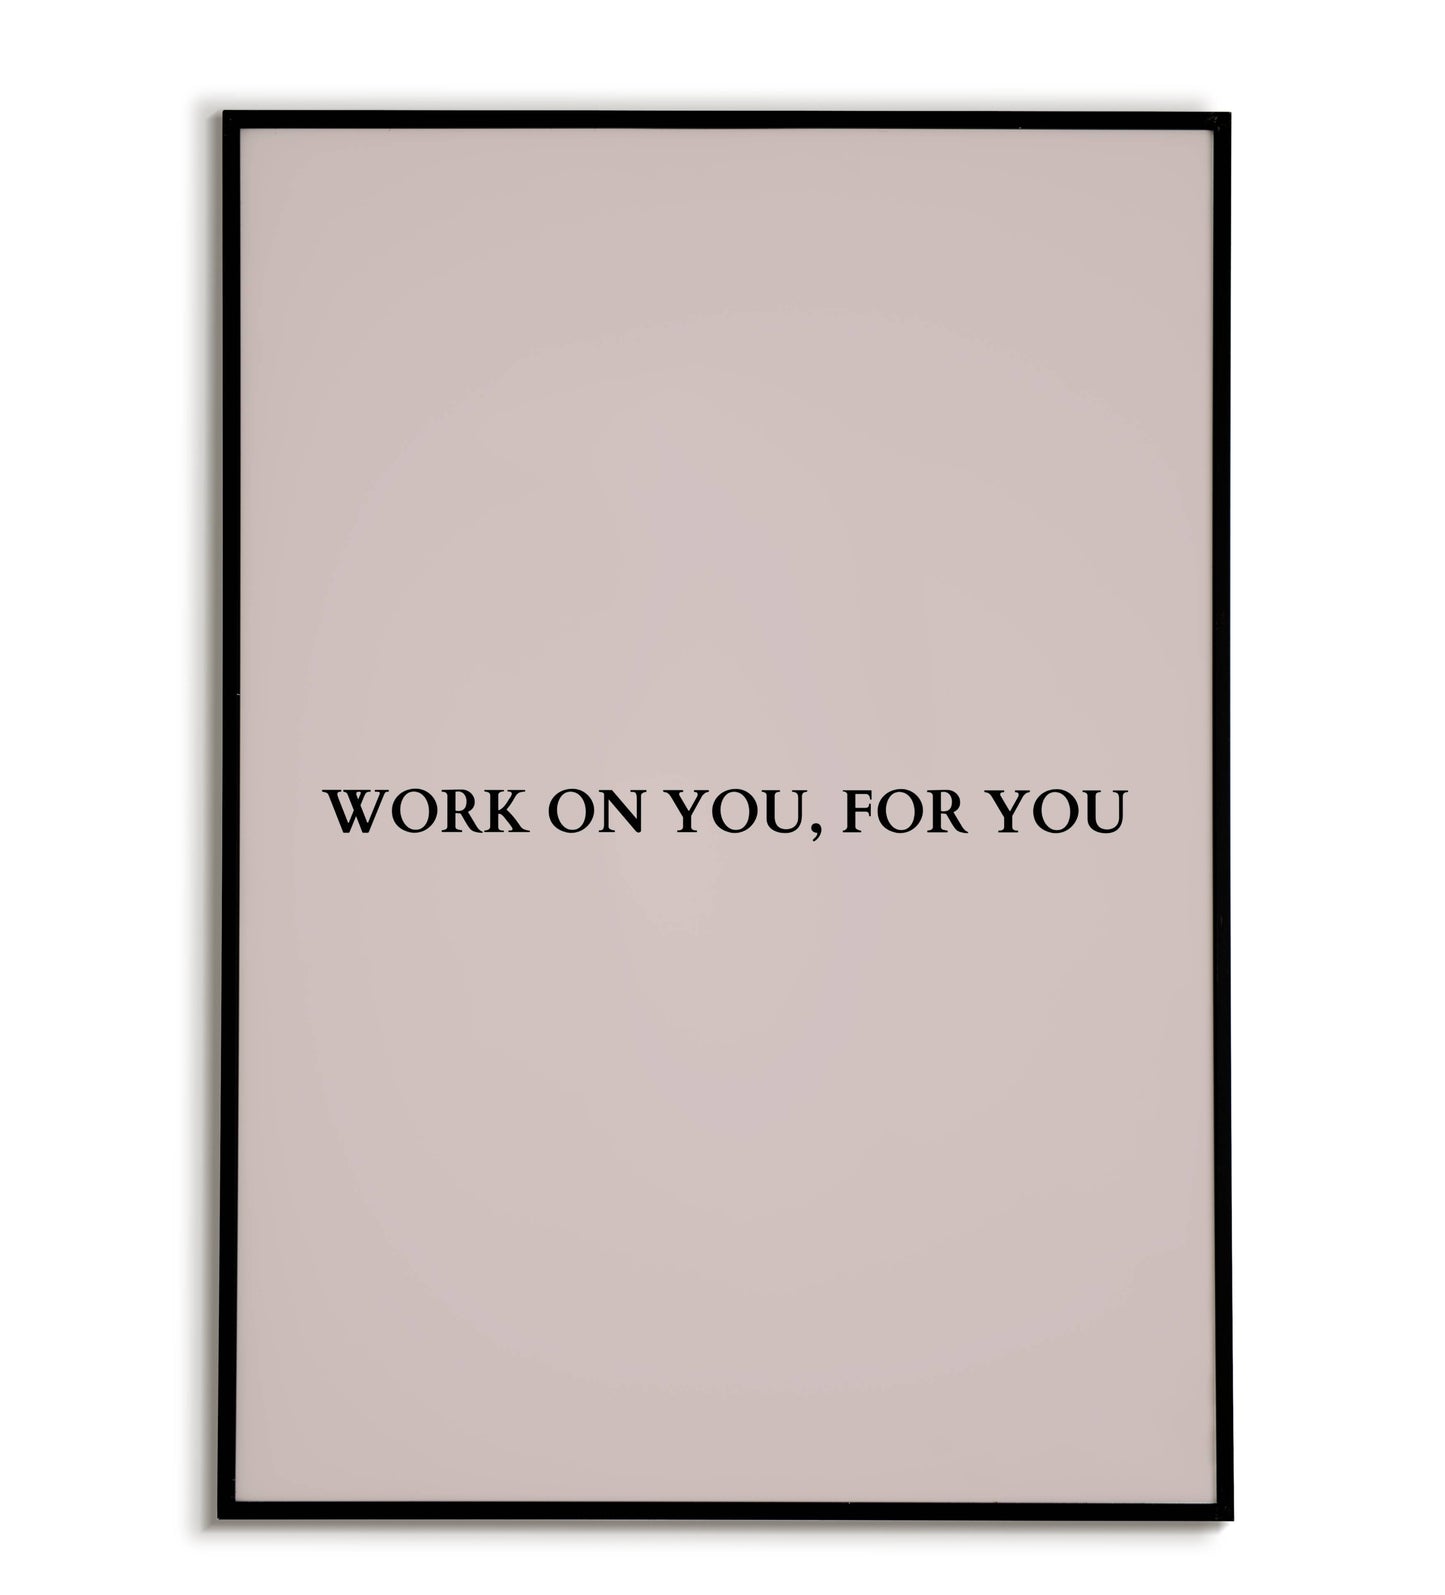 "Work on you, for you" printable inspirational poster for self-care.